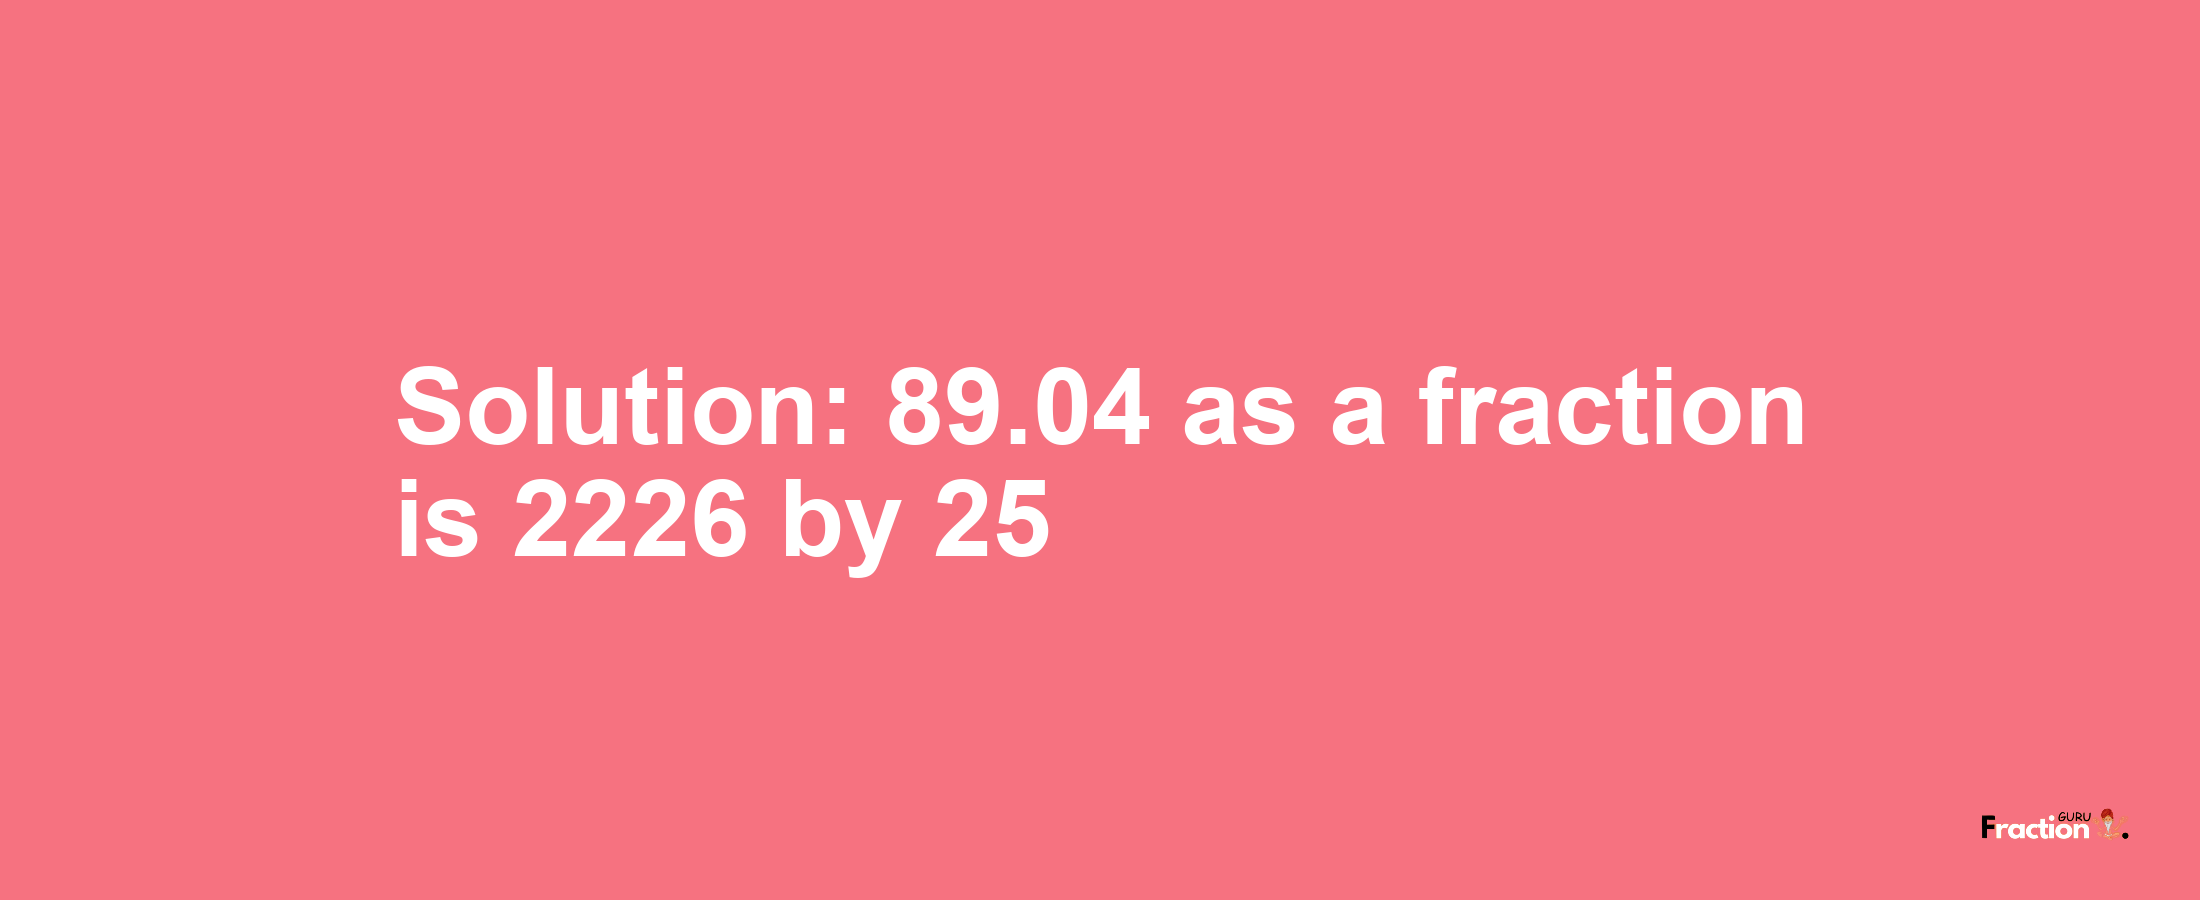 Solution:89.04 as a fraction is 2226/25